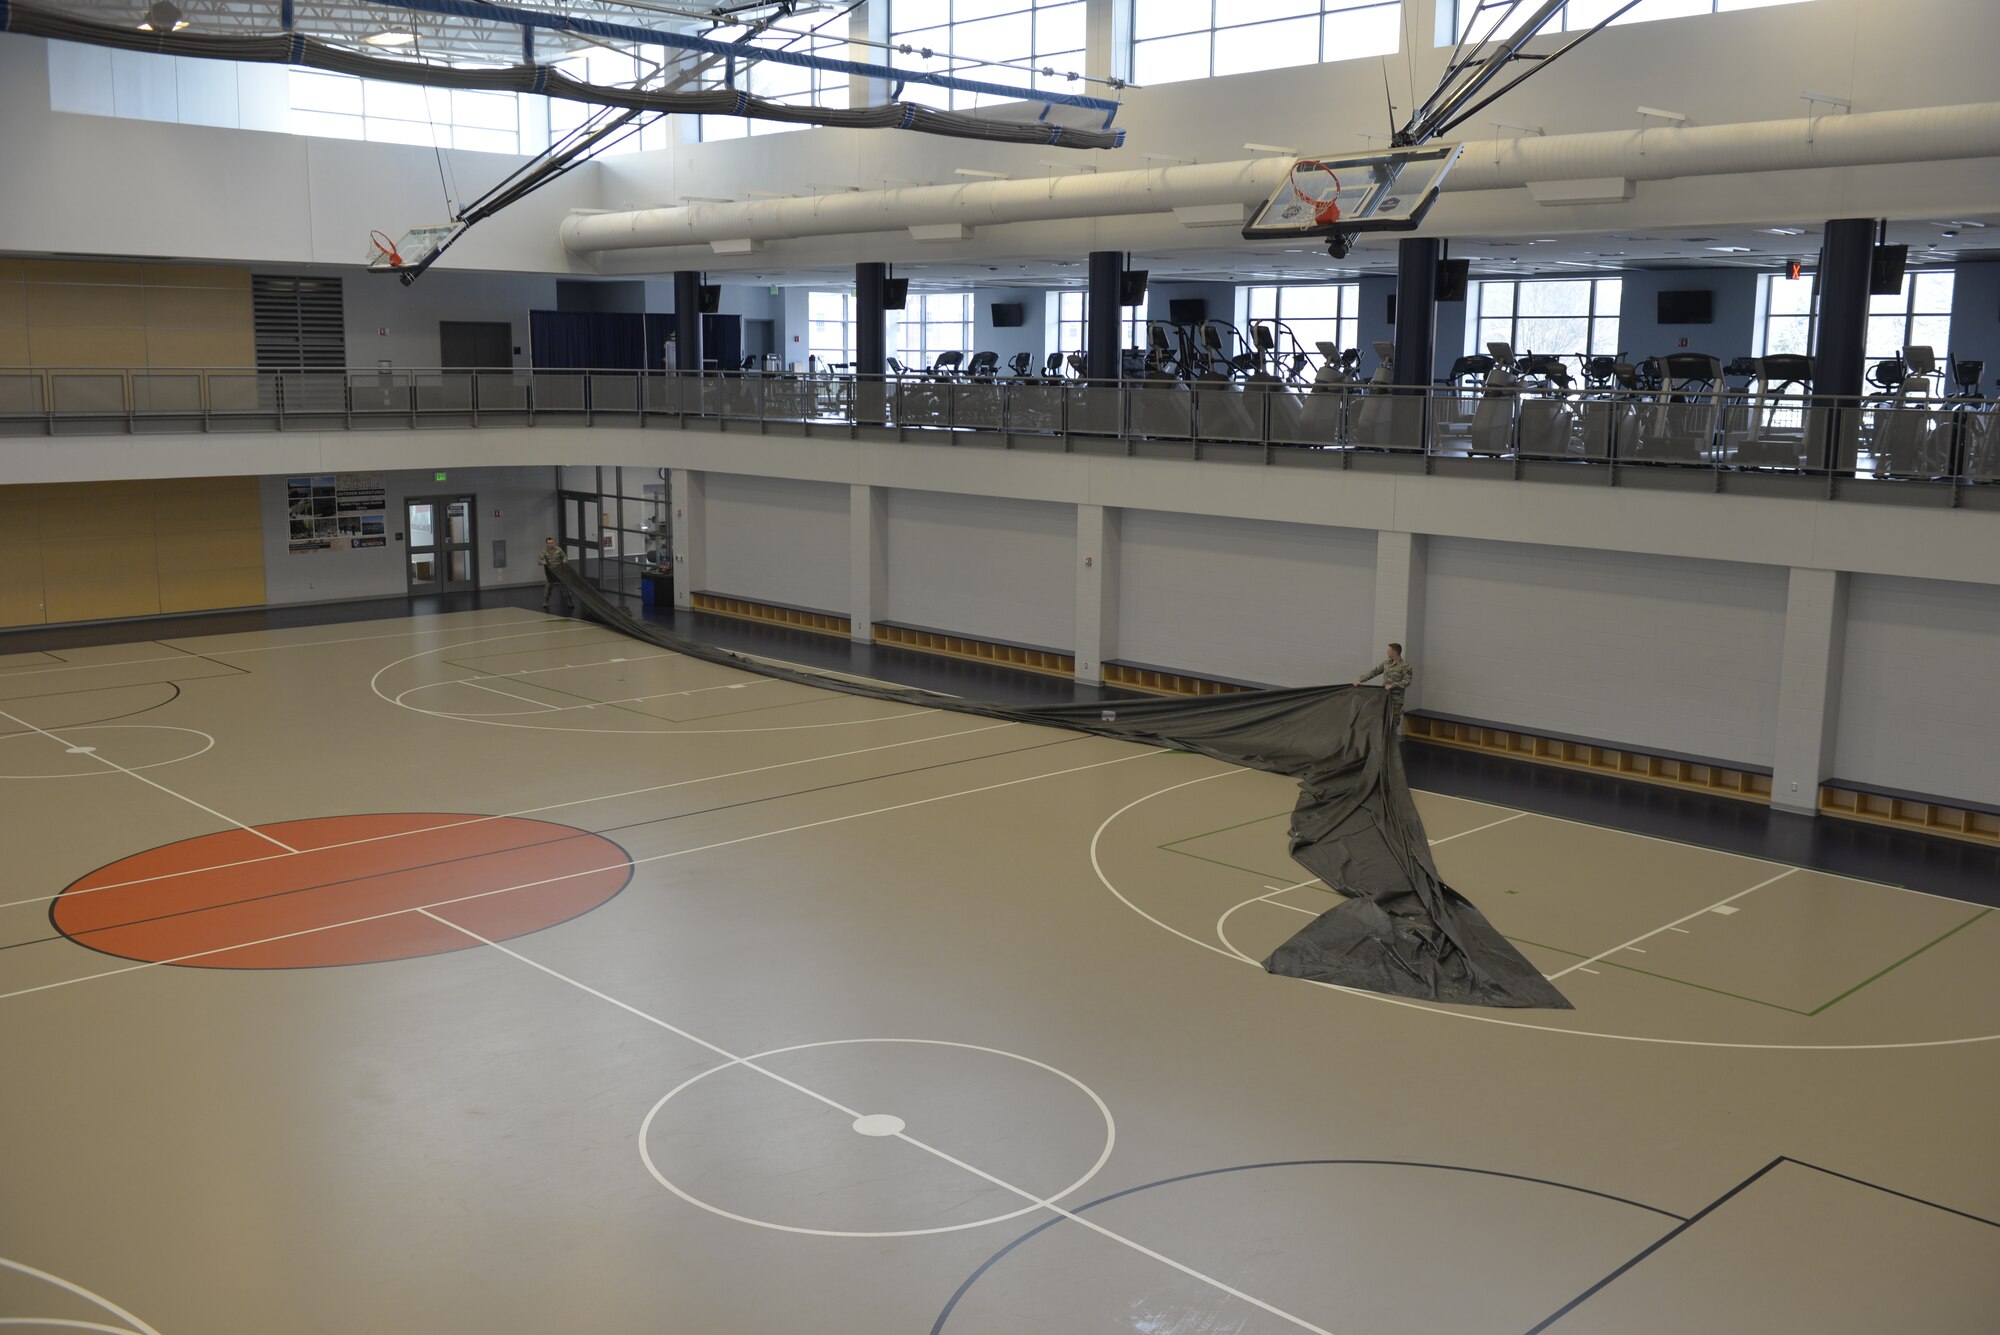 U.S. Air Force Tech. Sgt. Lance Whitehill and Tech. Sgt. Mark Quinn, 157th Civil Engineer Squadron, lay down matting at Hamel Recreation Center gym floor, March 25, 2020, at the University of New Hampshire. The facility will augment area hospitals treating COVID-19 cases, if necessary. It is one of nine the NHNG plans to set up and manage across the state. (U.S. Air National Guard photo by Tech. Sgt. Aaron Vezeau)